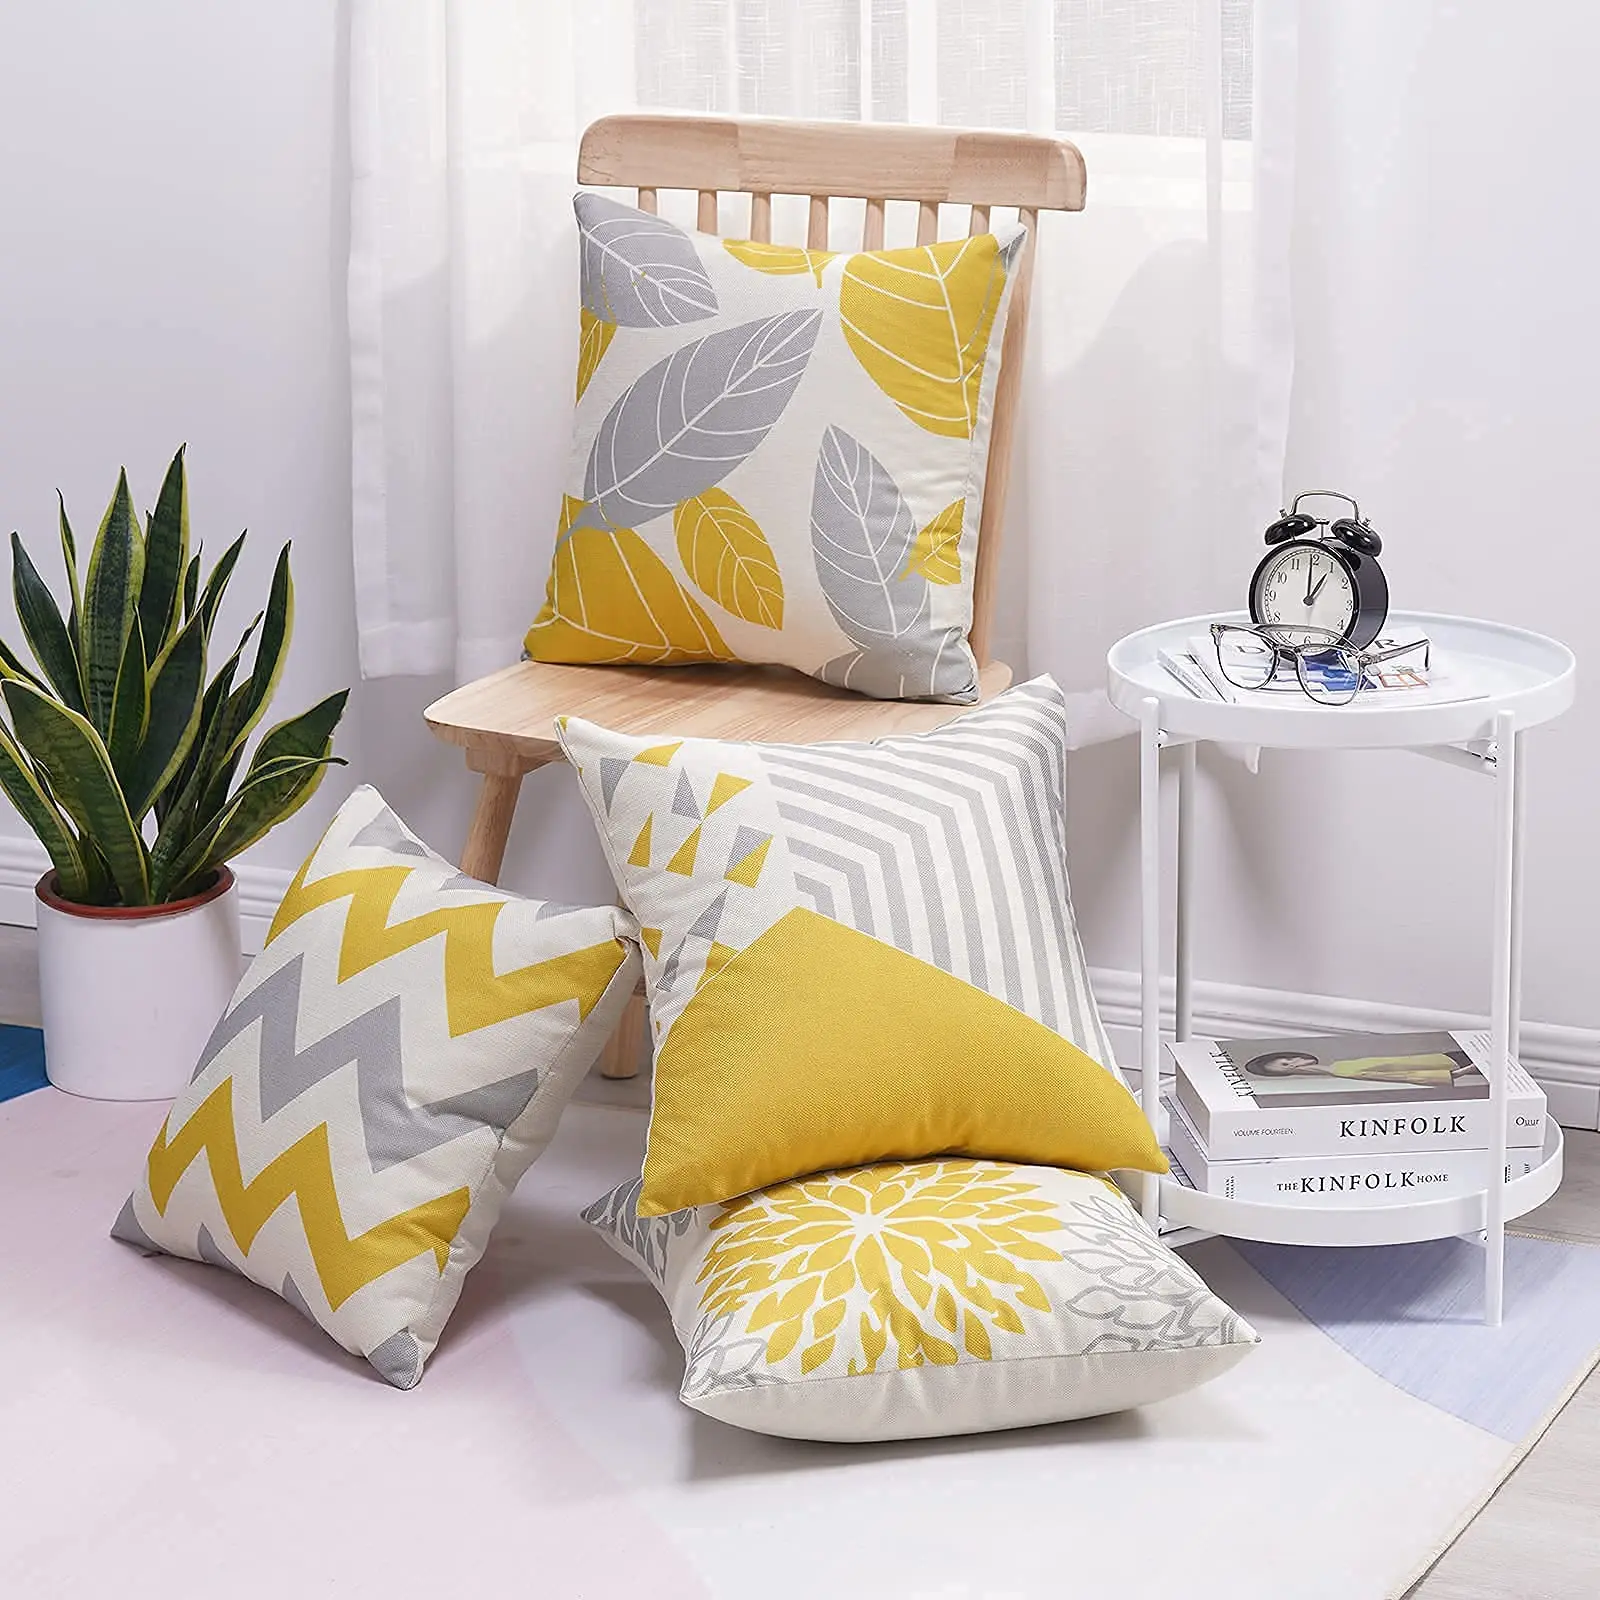 Nordic yellow gray geometric linen pillowcase sofa cushion cover home decoration can be customized for you 40x40 50x50 60x60